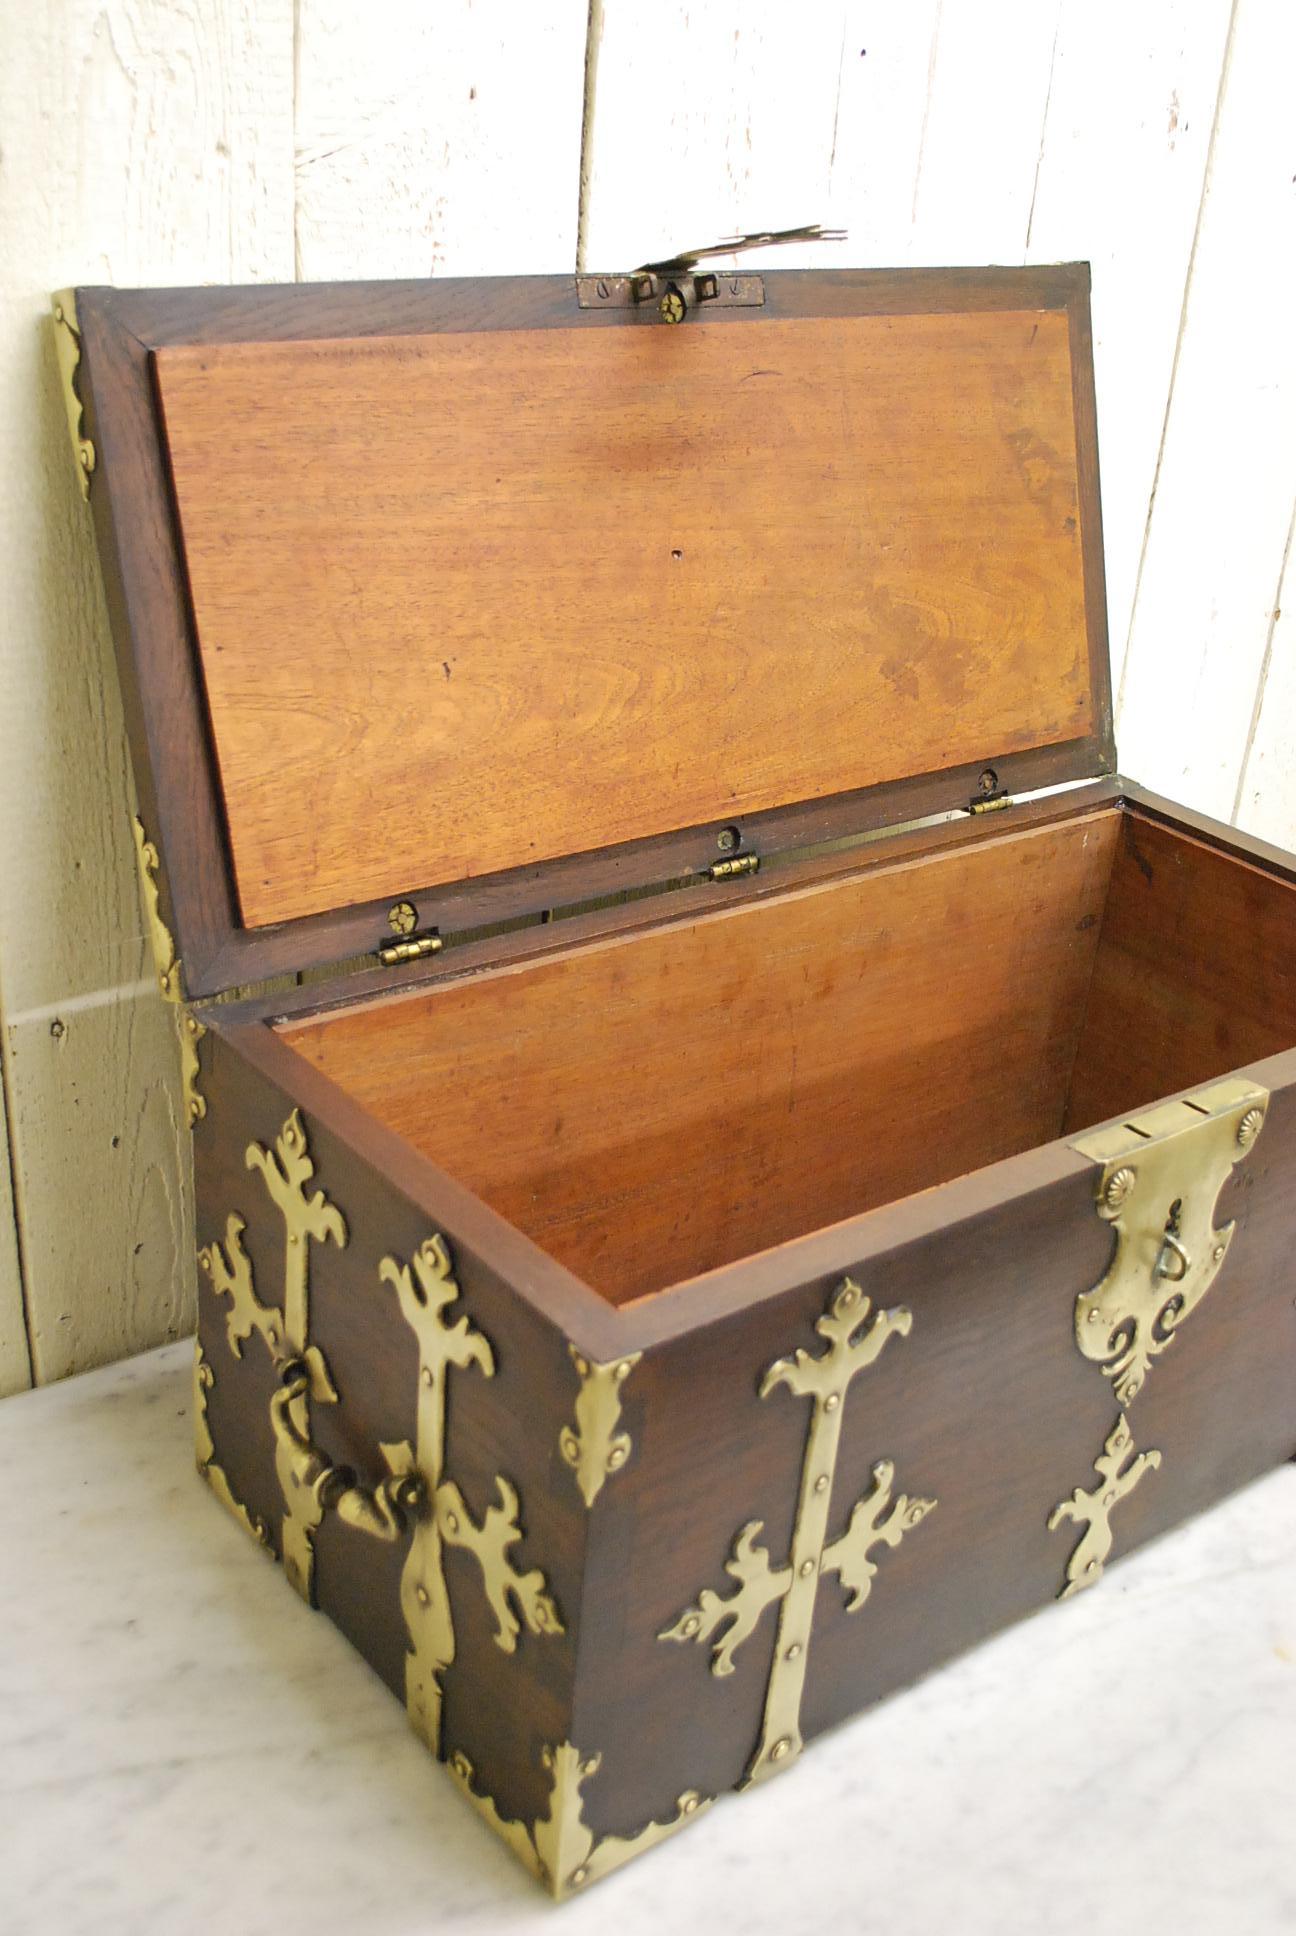 Padouk Early 18th Century Antique Spanish Strong Box or Treasure Chest For Sale